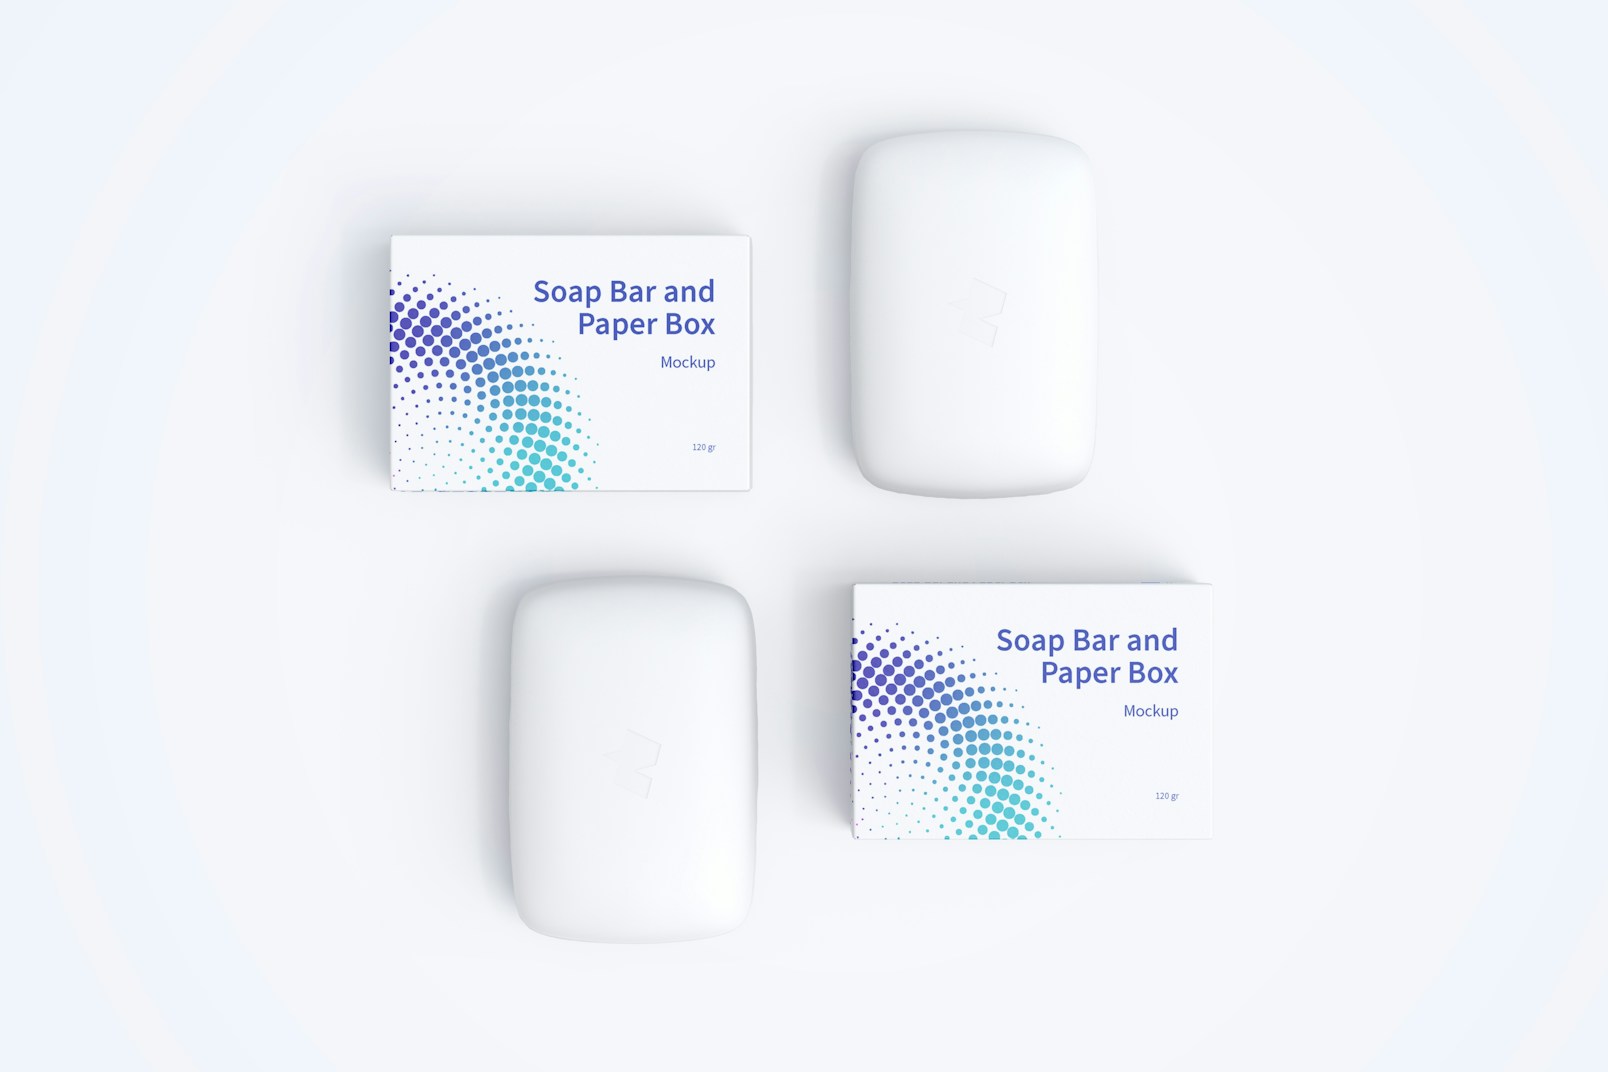 Soap Bar and Paper Boxes Mockup, Top View